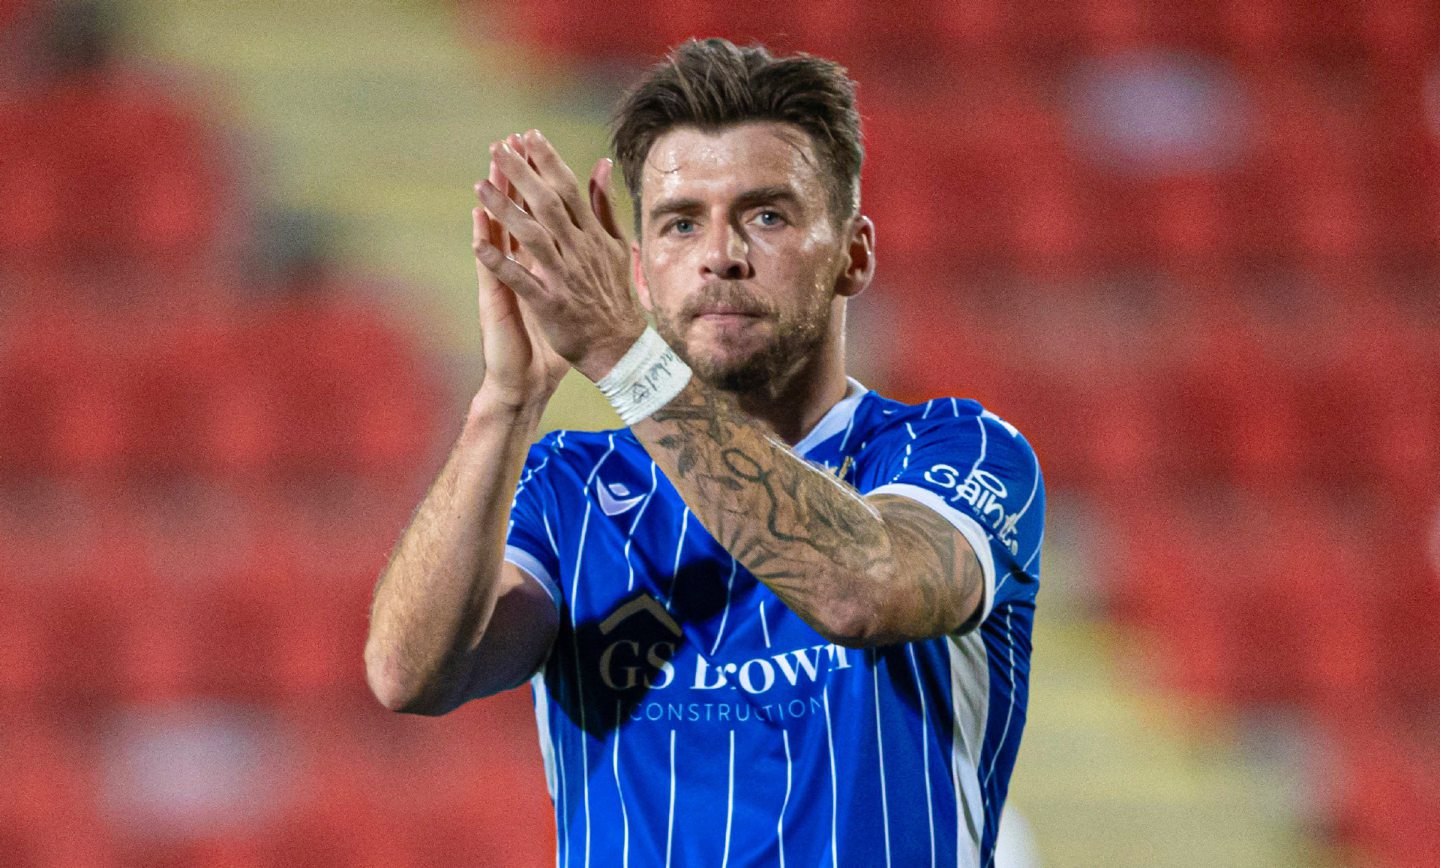 St Johnstone's Graham Carey applauds the fans at full-time.